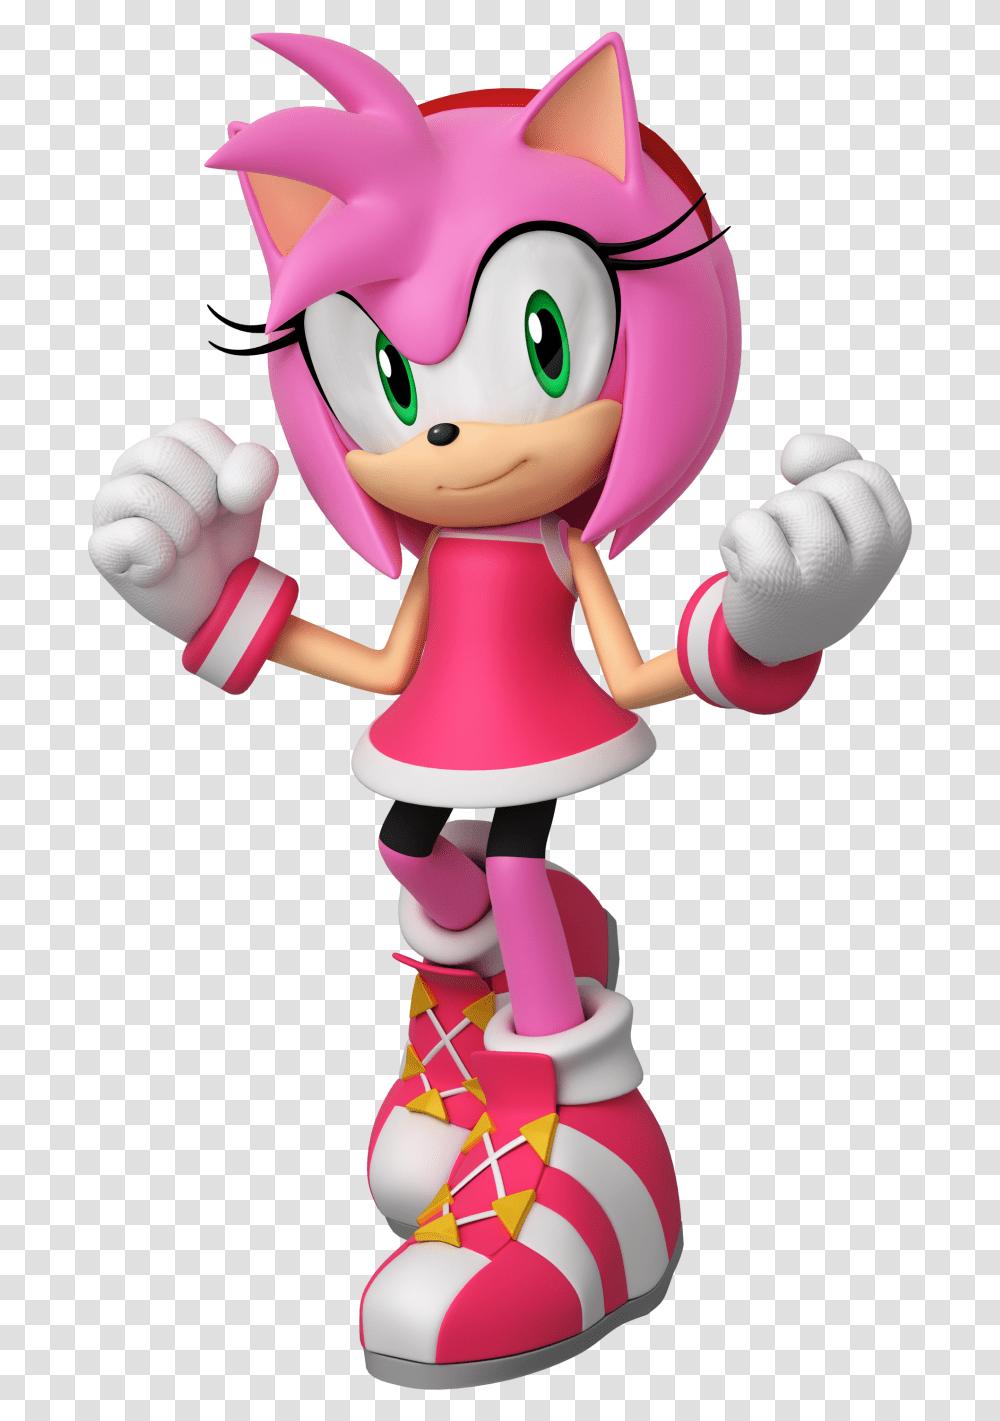 Amy Msog Amy Rose Mario And Sonic, Hand, Performer, Toy, Figurine Transparent Png